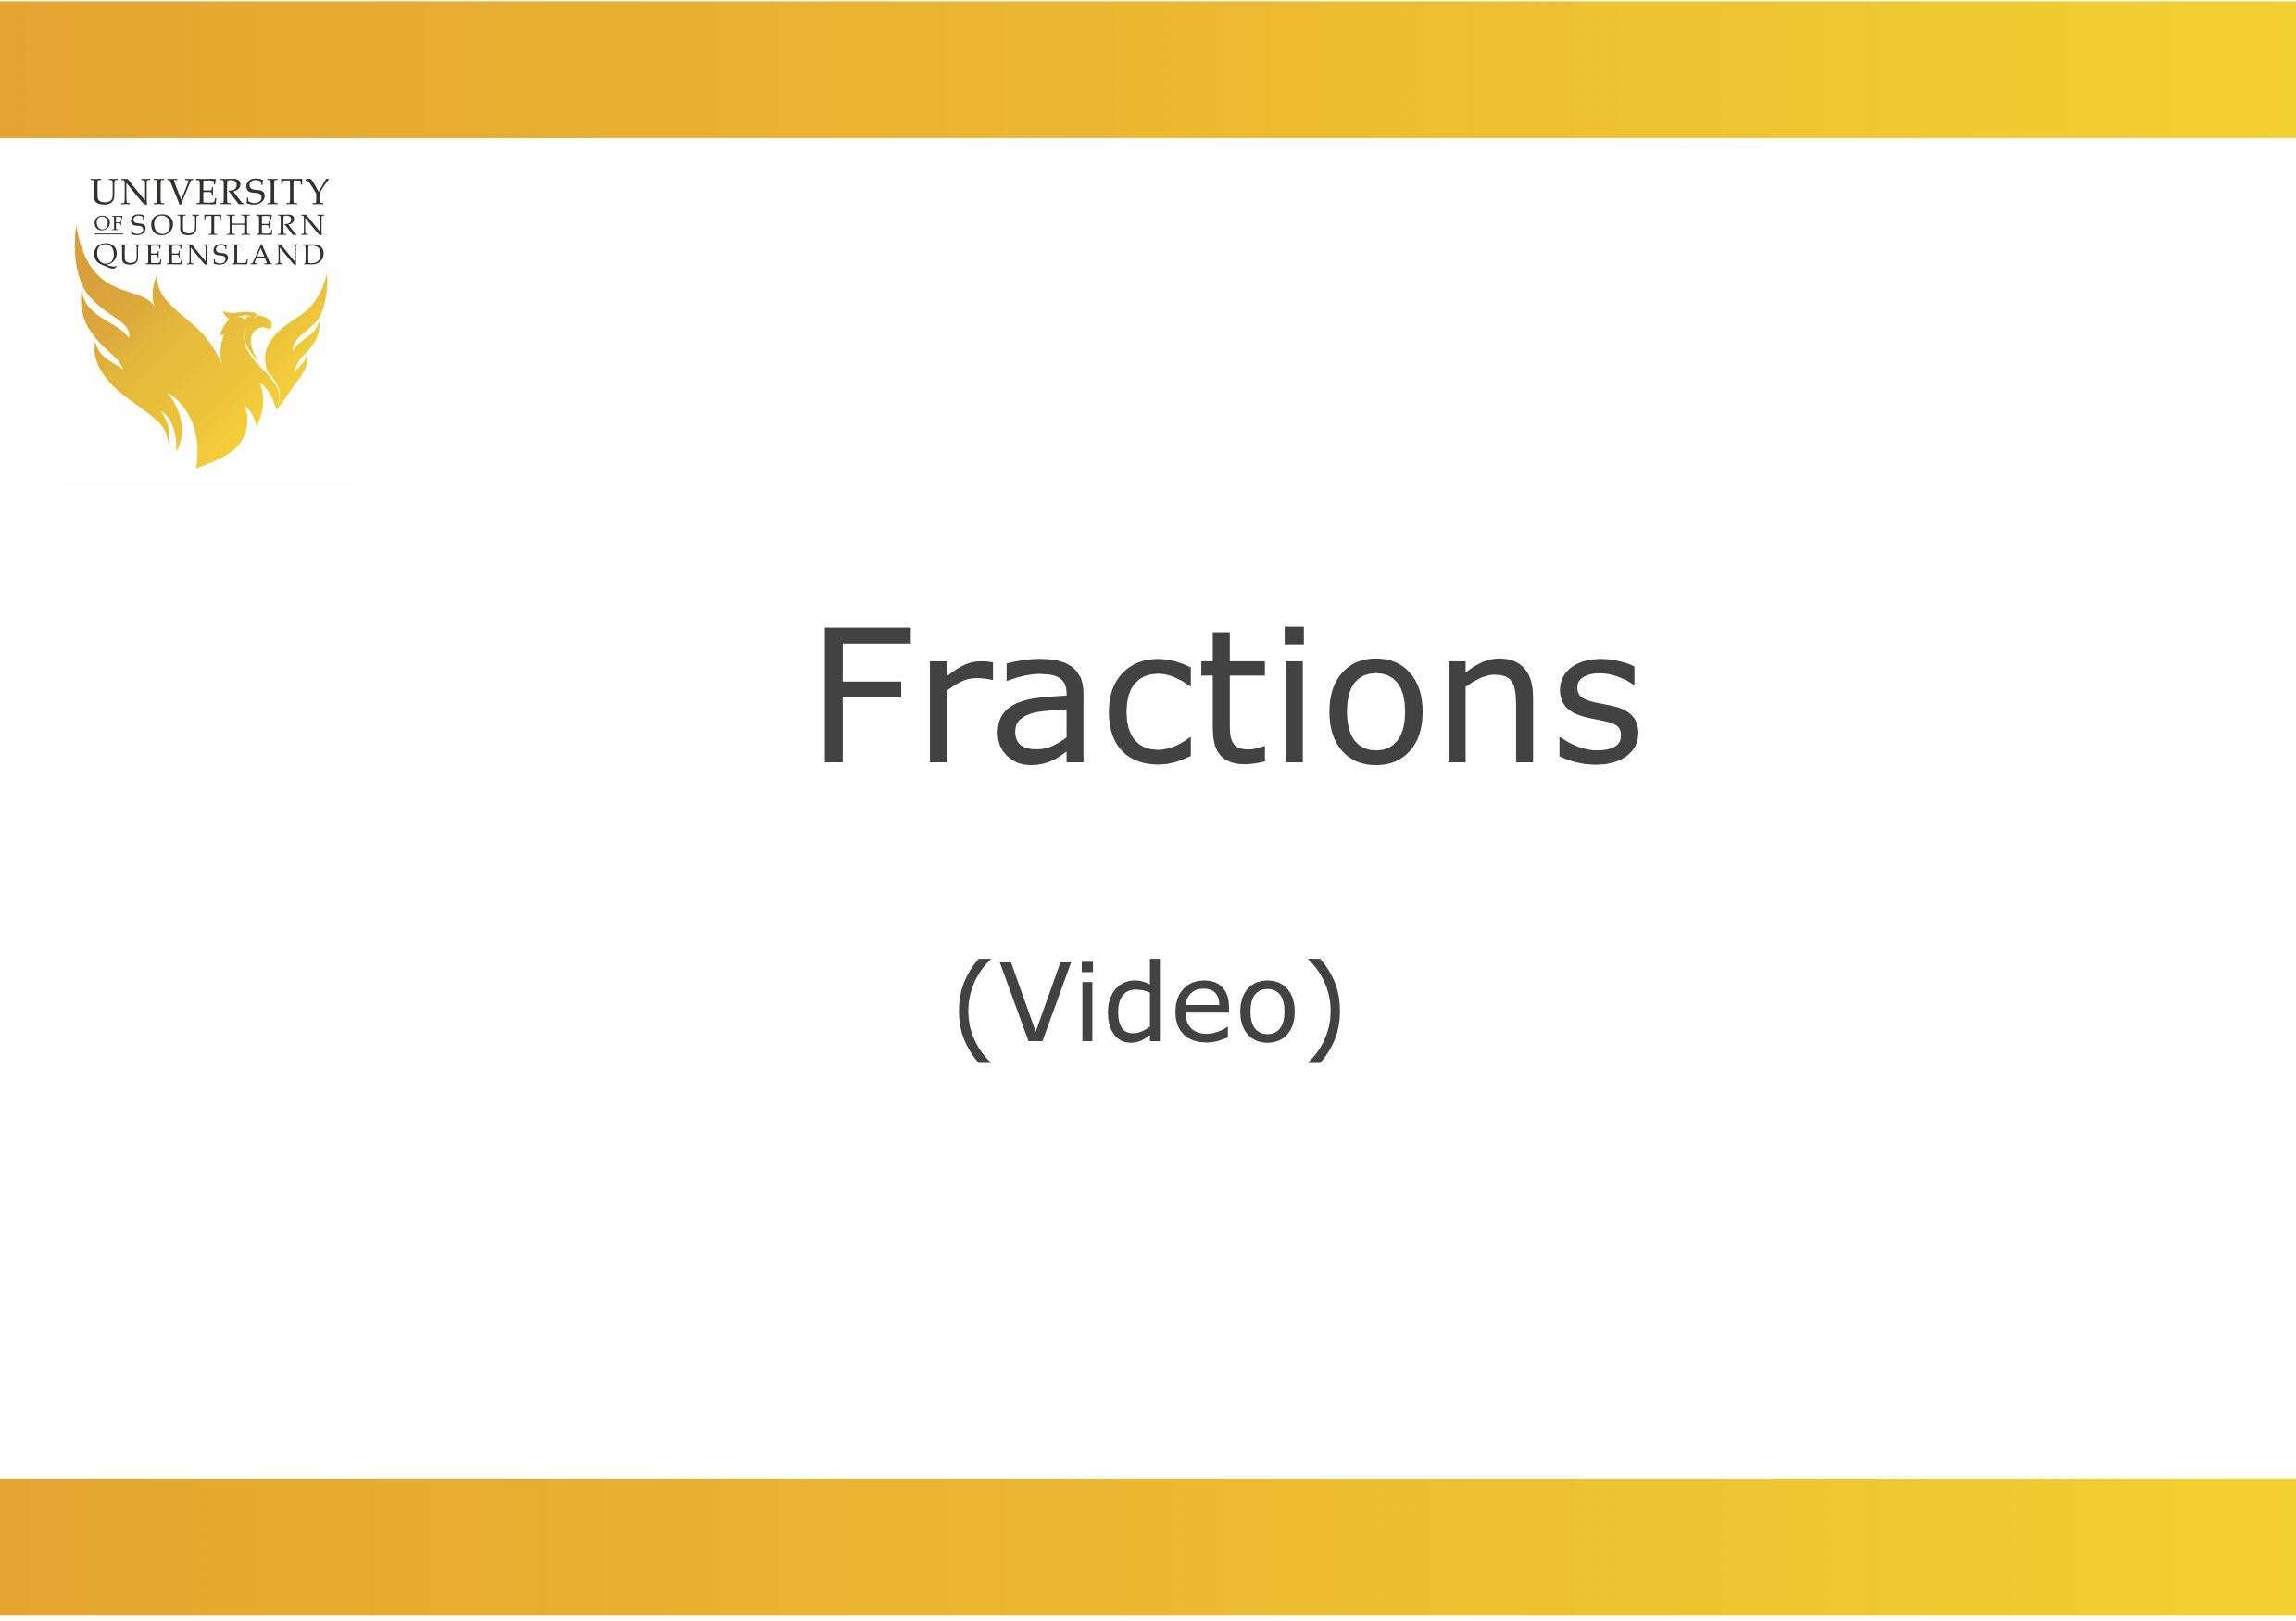 fractions_image